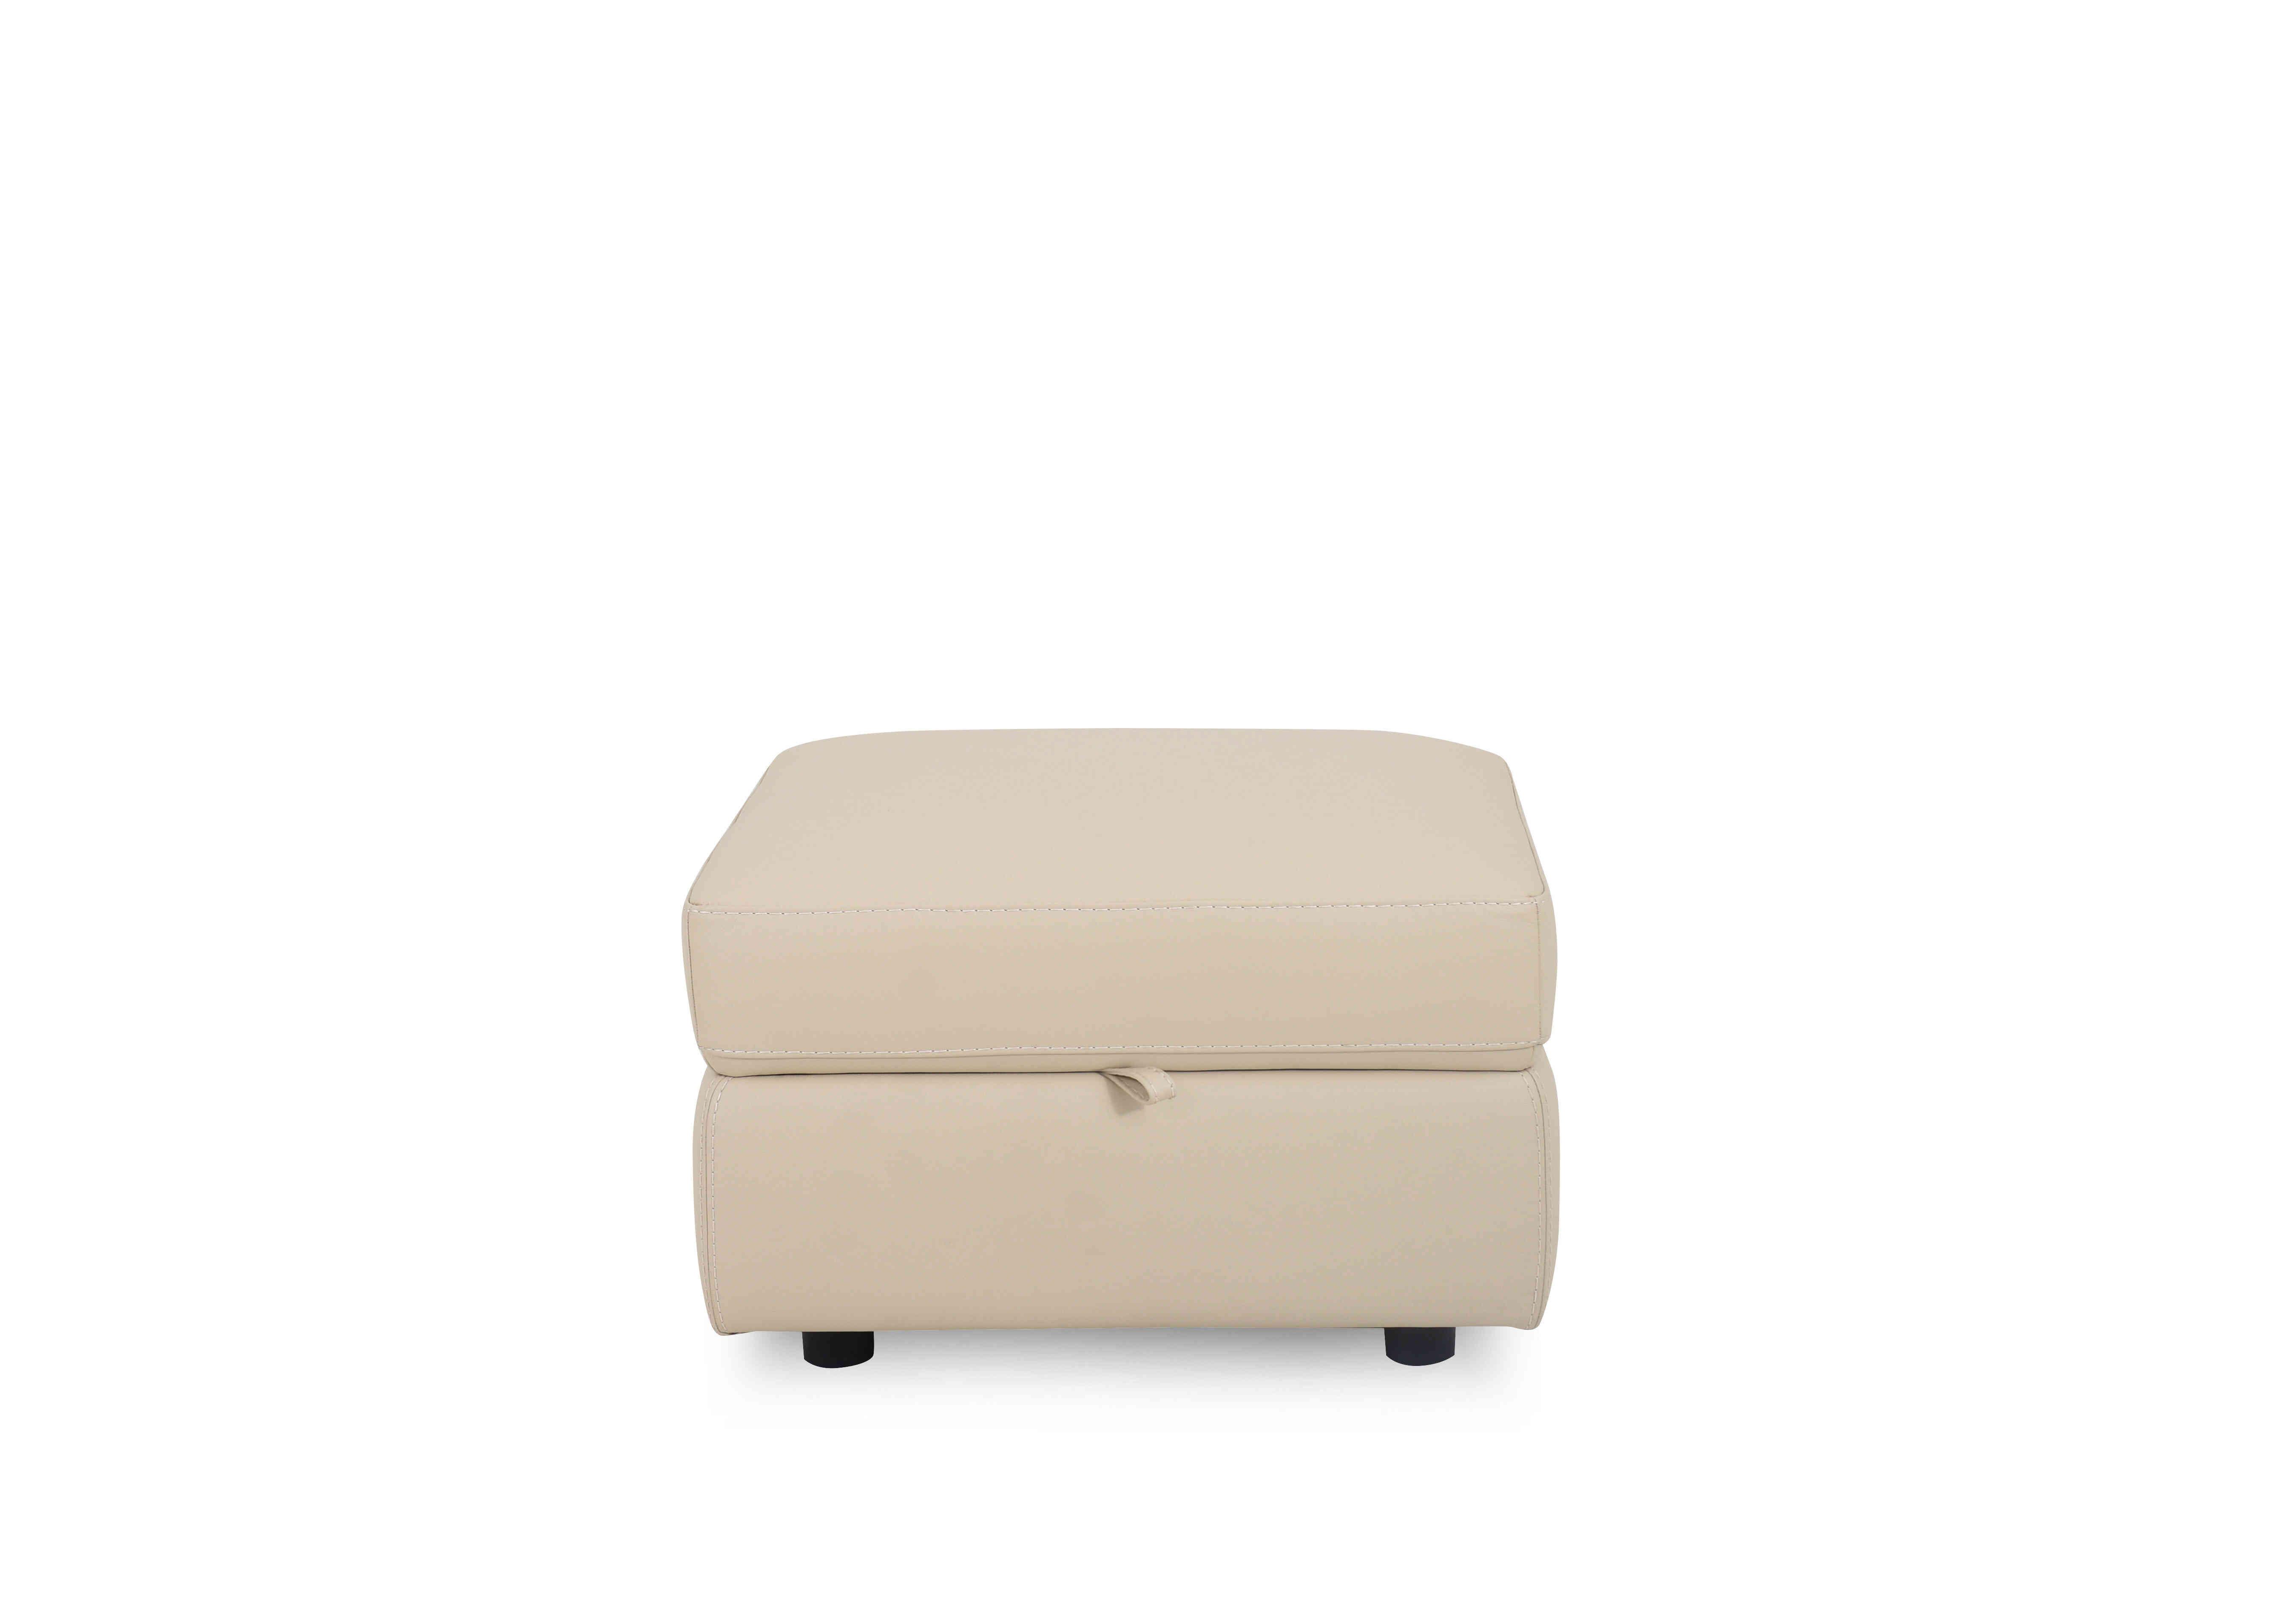 Compact Collection Lille Leather Storage Footstool in Bv-862c Bisque on Furniture Village